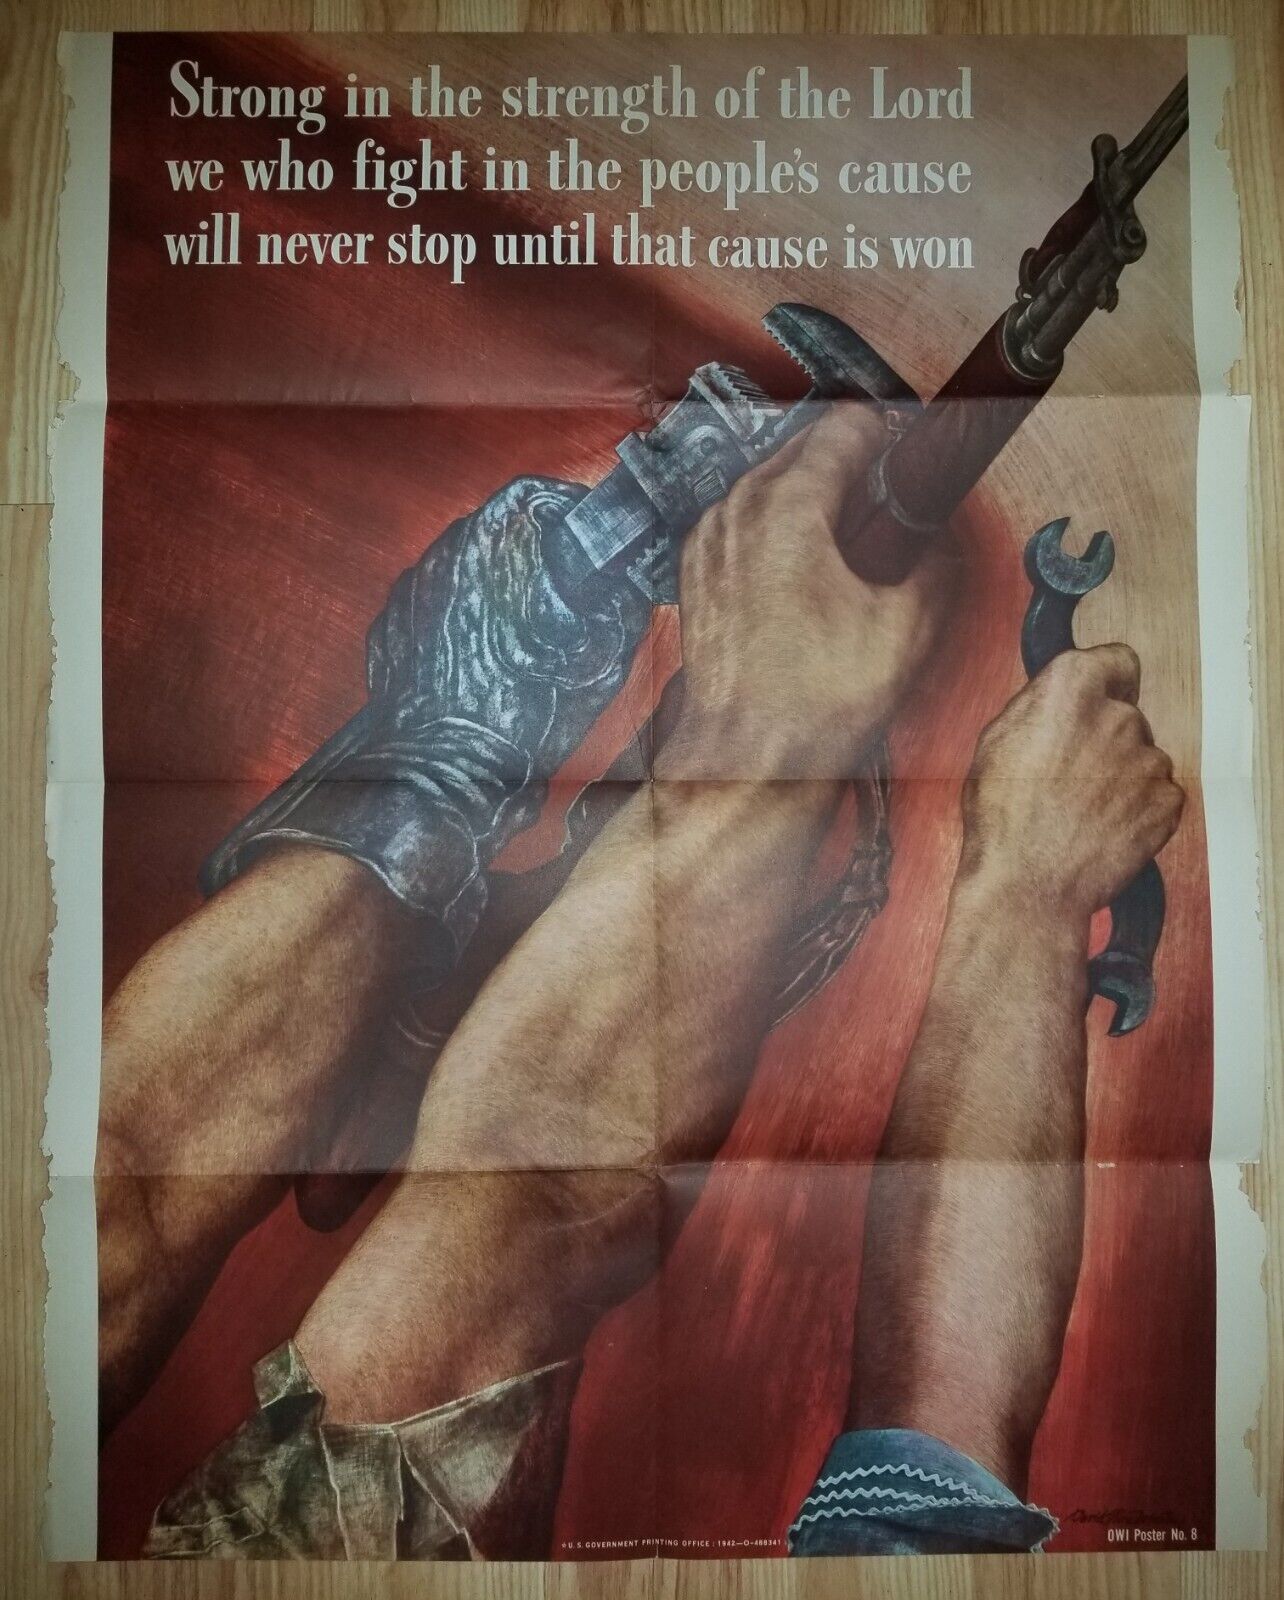 Original 1942 WWII “Strong in the Strength of the Lord” Poster